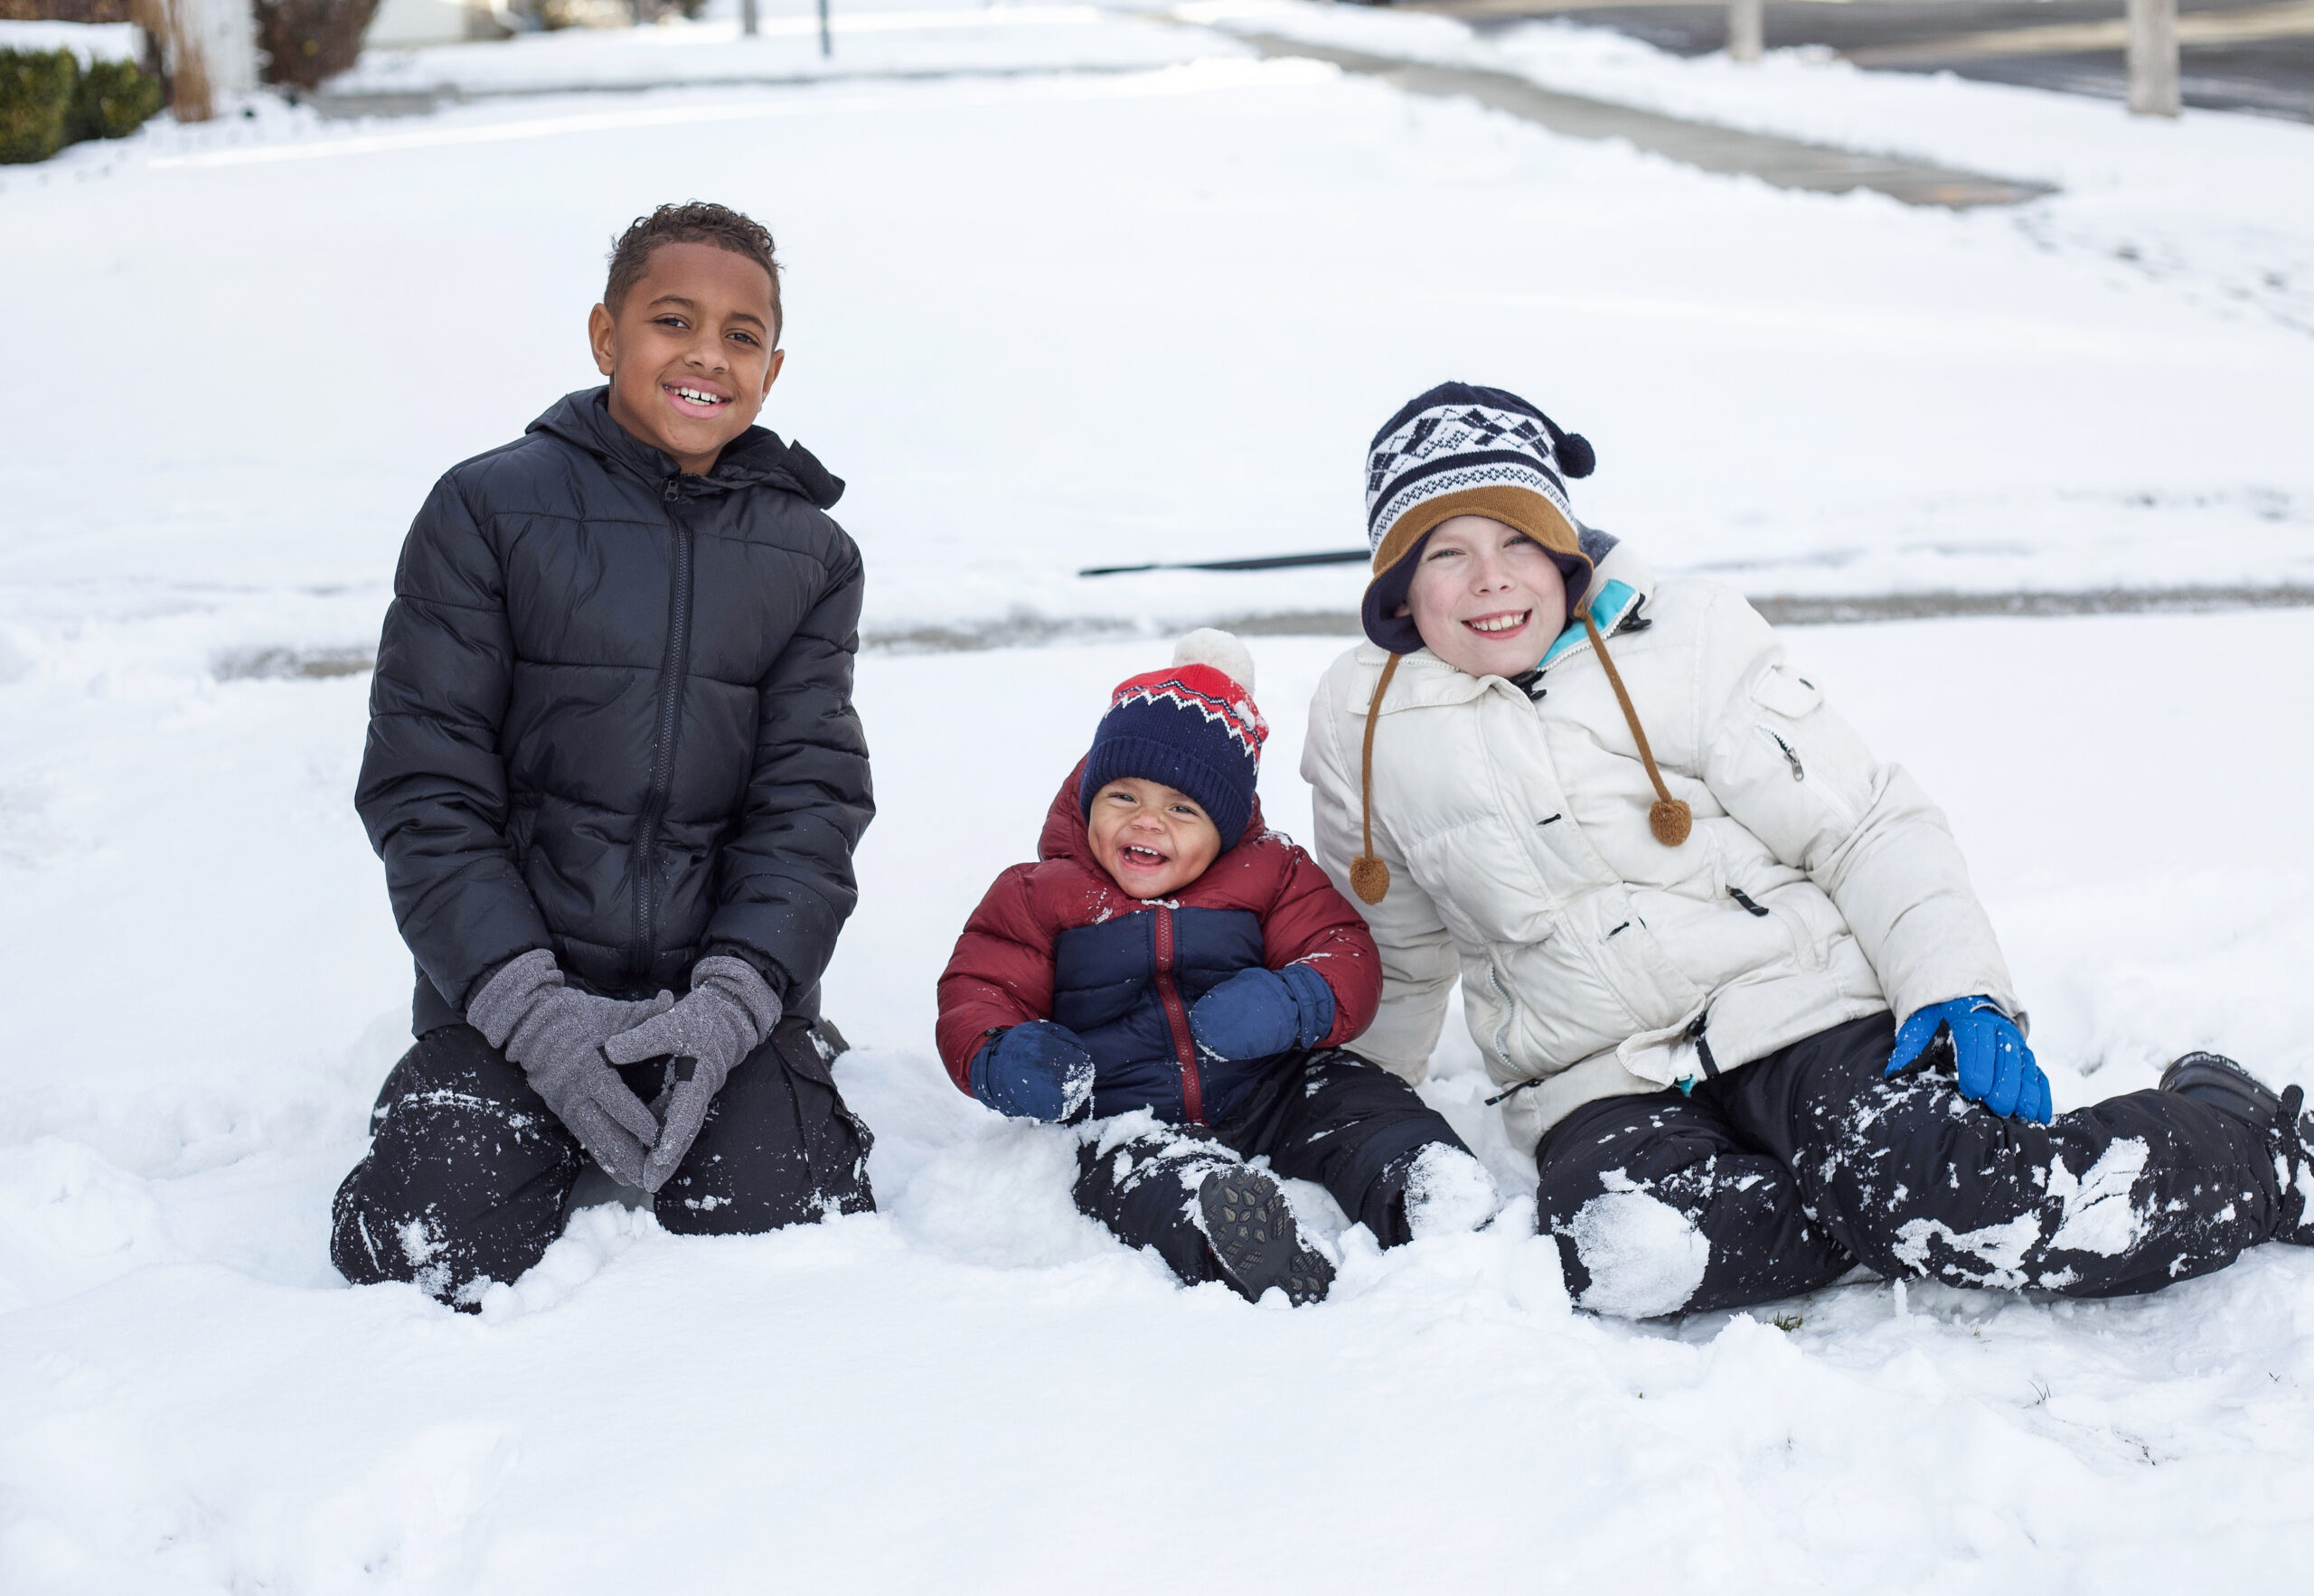 Three children are sitting in the snow. The child on the left is wearing a black jacket and gray gloves. The child in the middle is wearing a red jacket and a blue hat with a red pom-pom. The child on the right is wearing a white jacket and a knit hat.